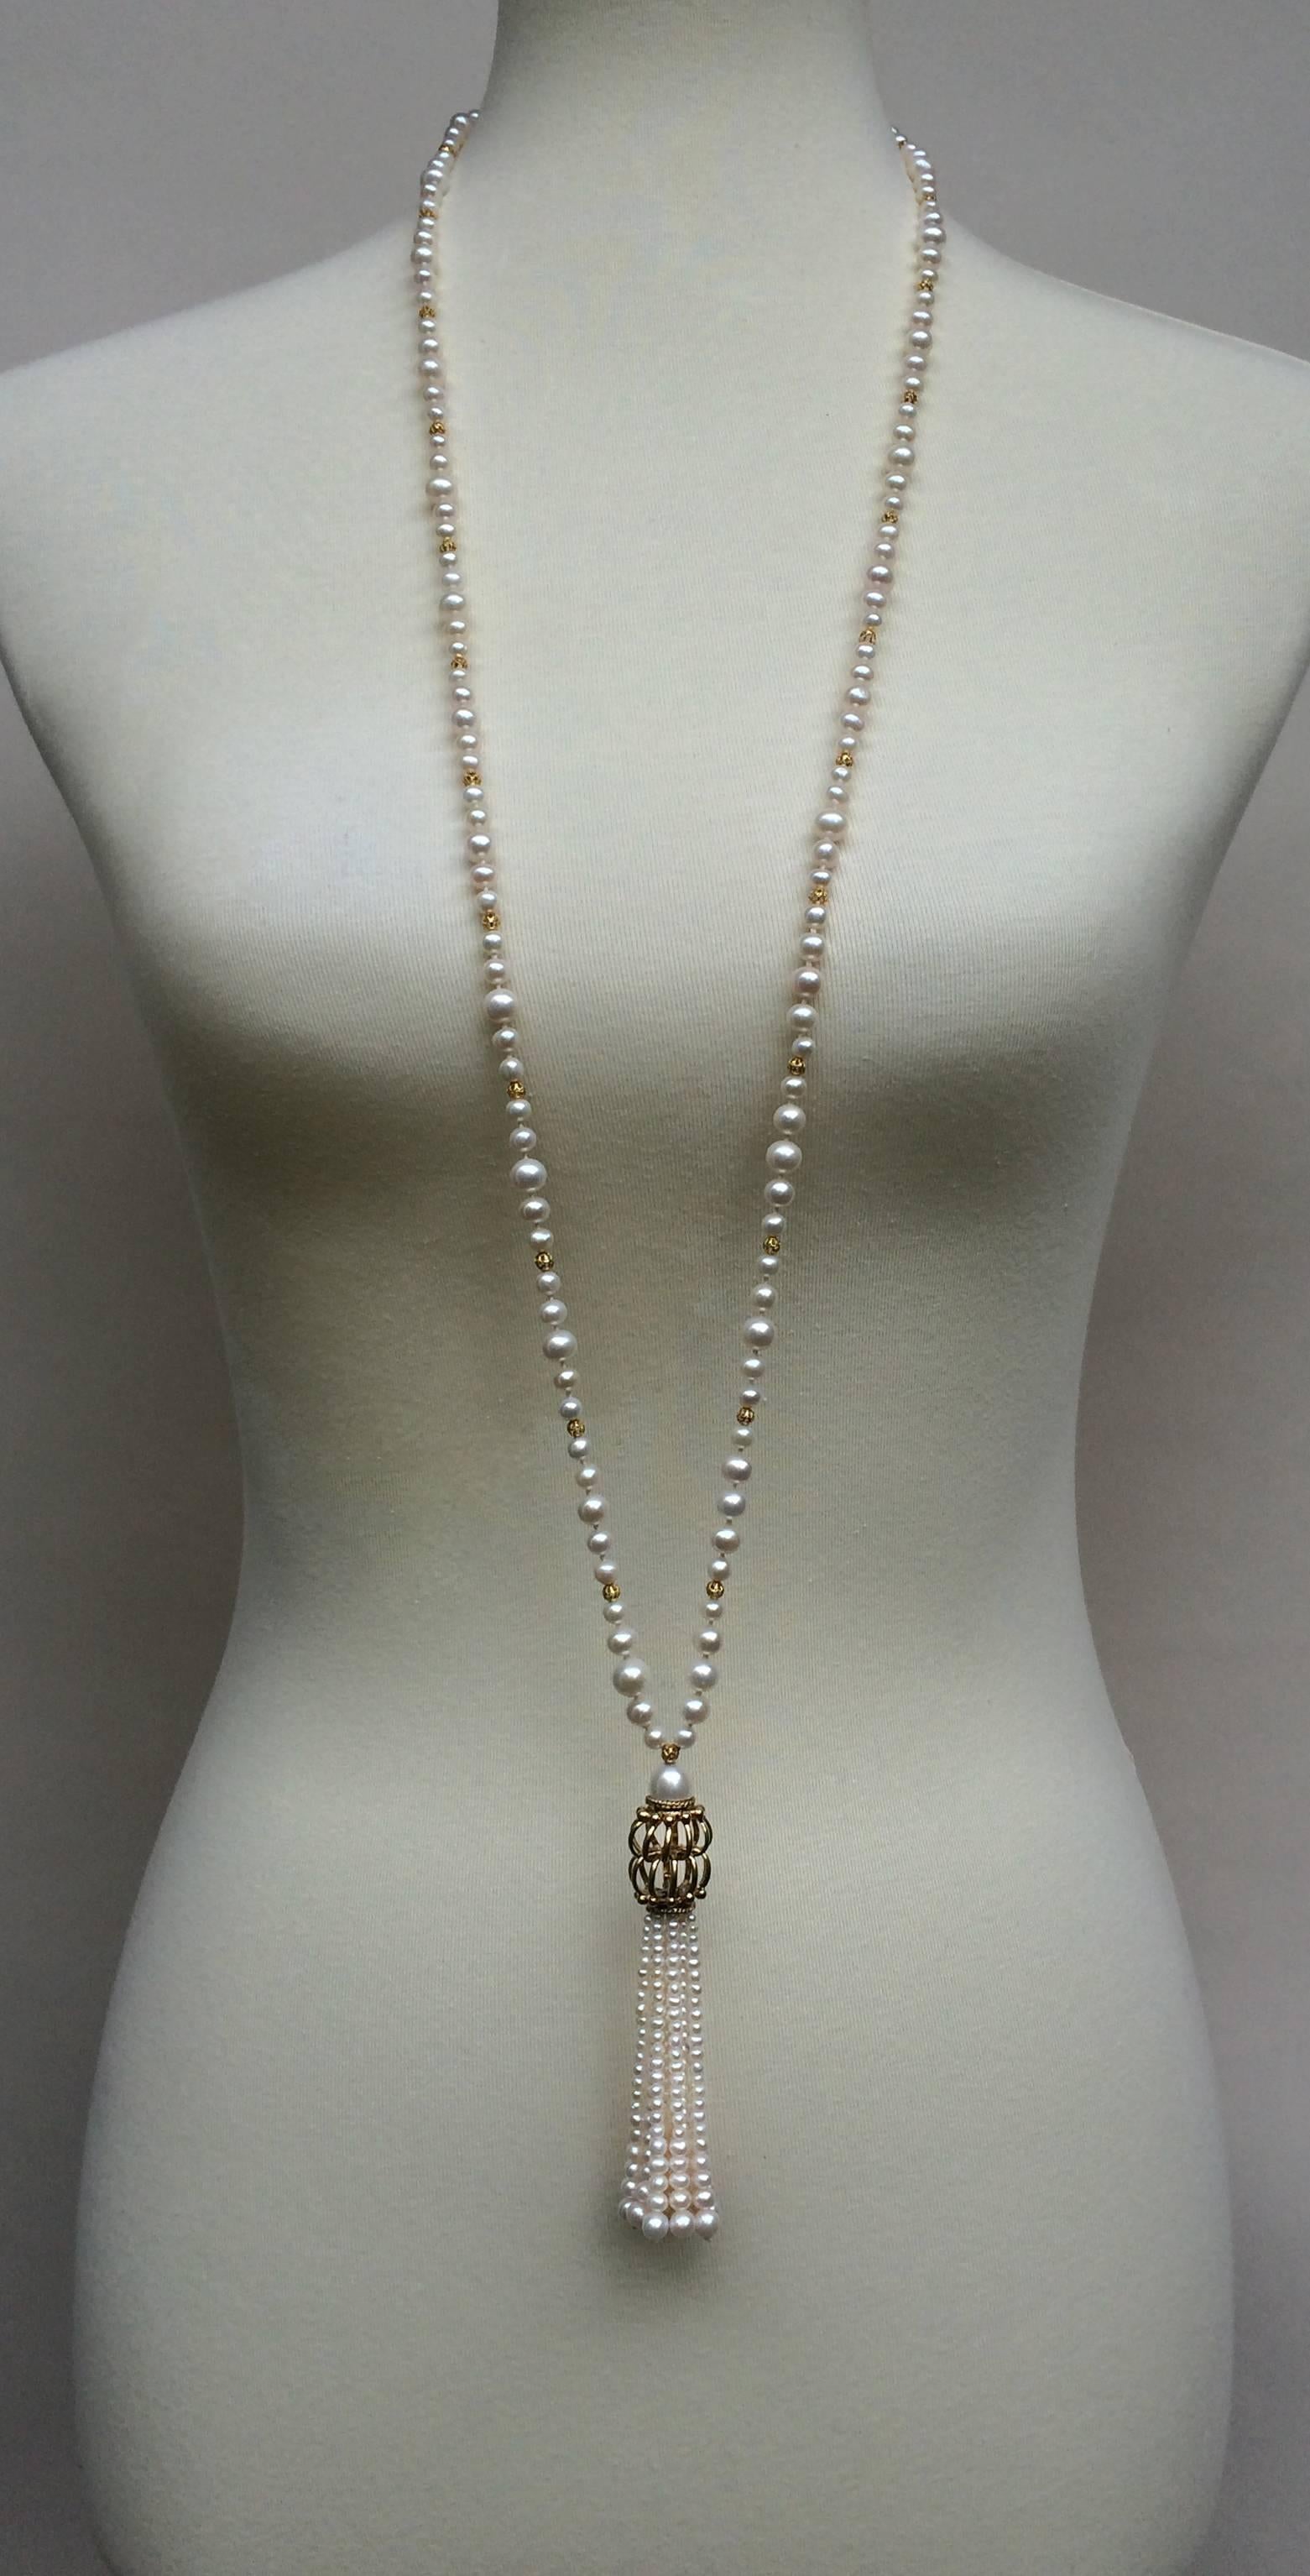 Multiple slight graduations give this beautiful piece an illusion of movement. Smooth and round pearls ranging from 2.5 mm- 6 mm round are graduated back to back and divided by small filigree gold plated silver beads. The strand of pearls flow into